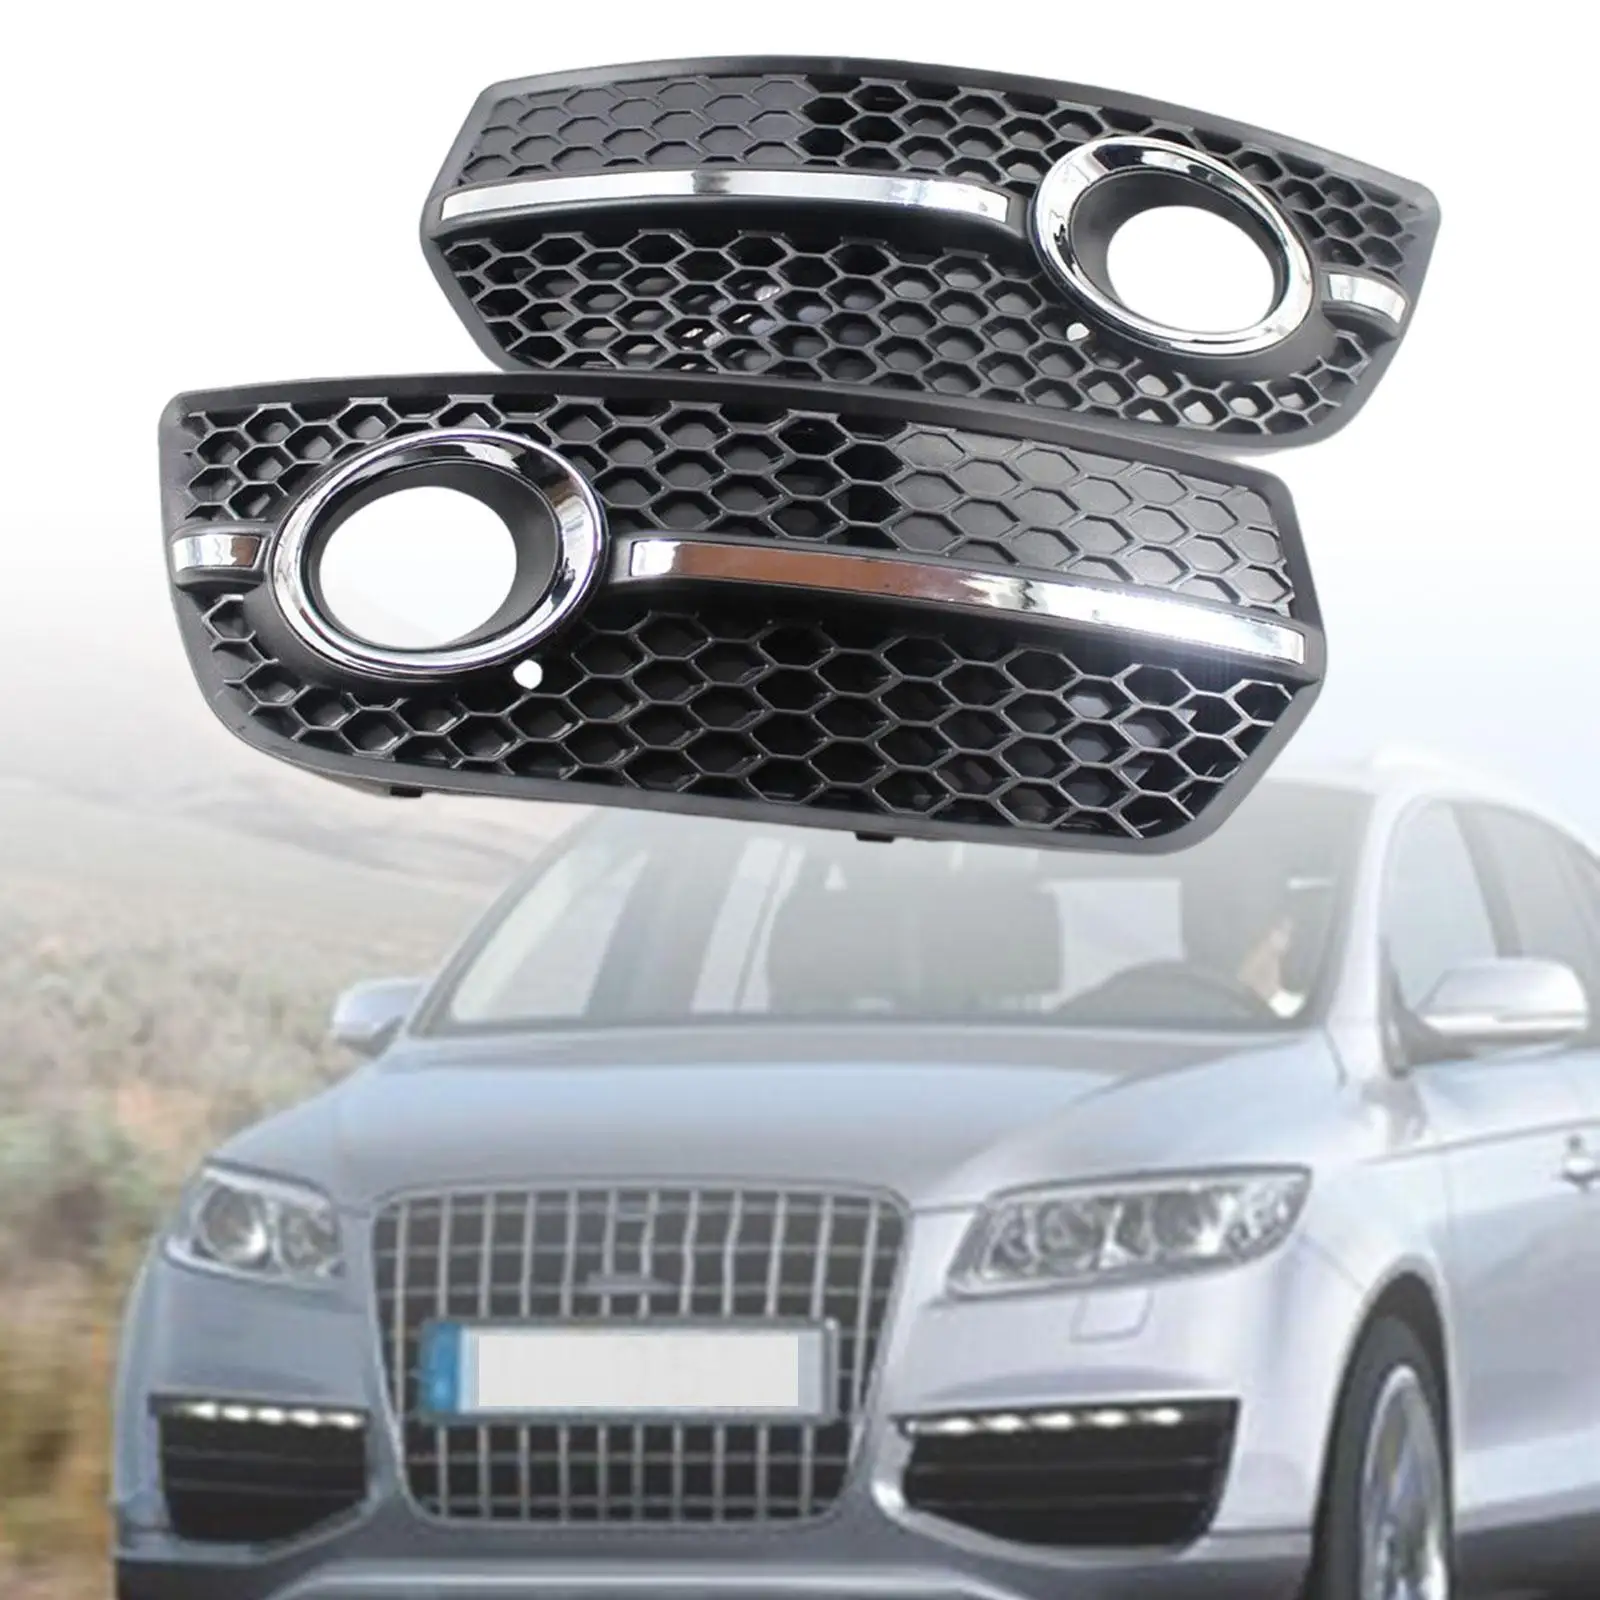 2x Front Lower Bumper Fog Light Lamp Cover Trims Grill for Audi Q5 09-12